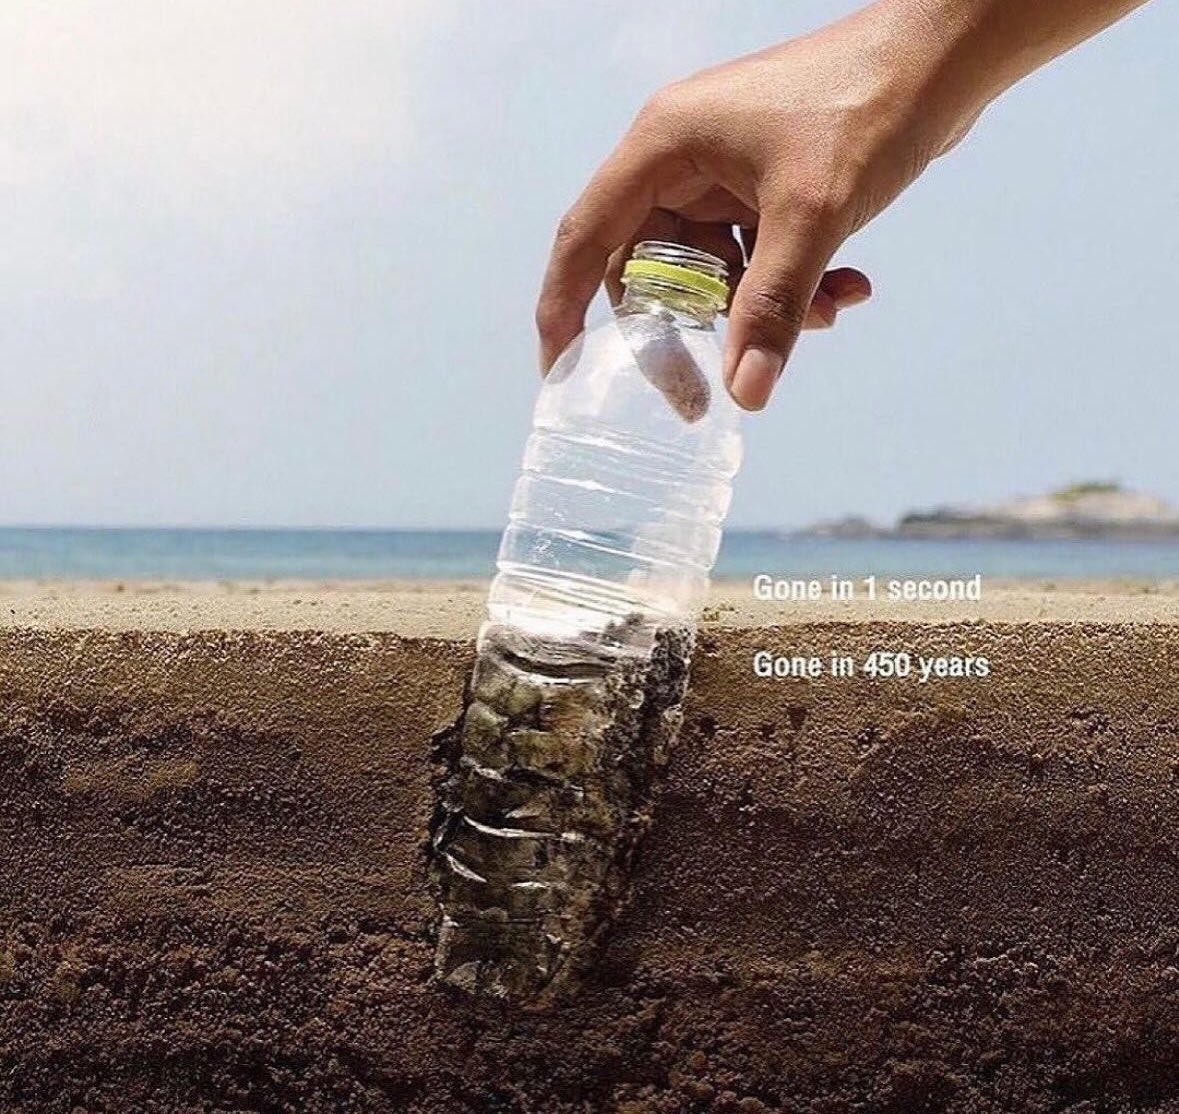 Plastic waste can take anywhere from 20 to 500 years to decompose, and even then, it never fully disappears; it just gets smaller and smaller. Switch to sustainable alternatives to single use plastics. They will save you money, and it’s better for our planet! #plasticfree